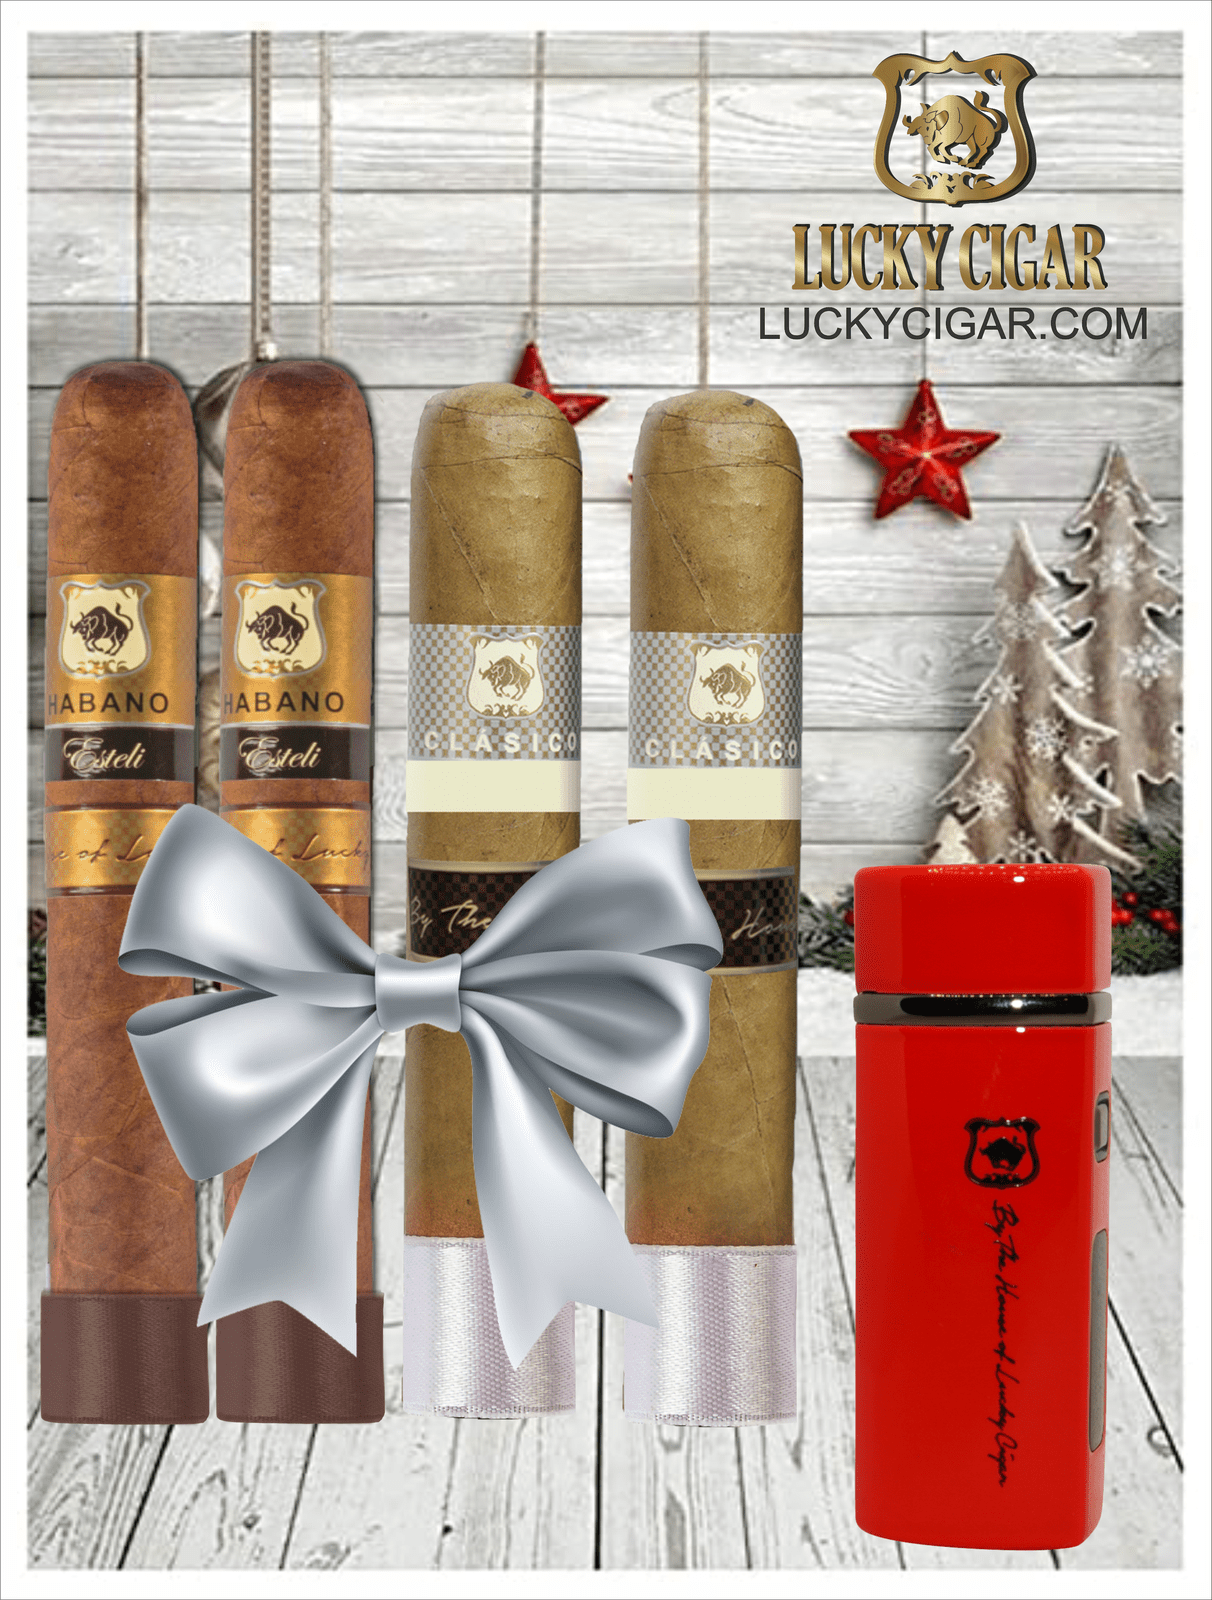 Cigar Gift Sets: Set of 4 Cigars, 2 Classico, 2 Habano Esteli with Torch